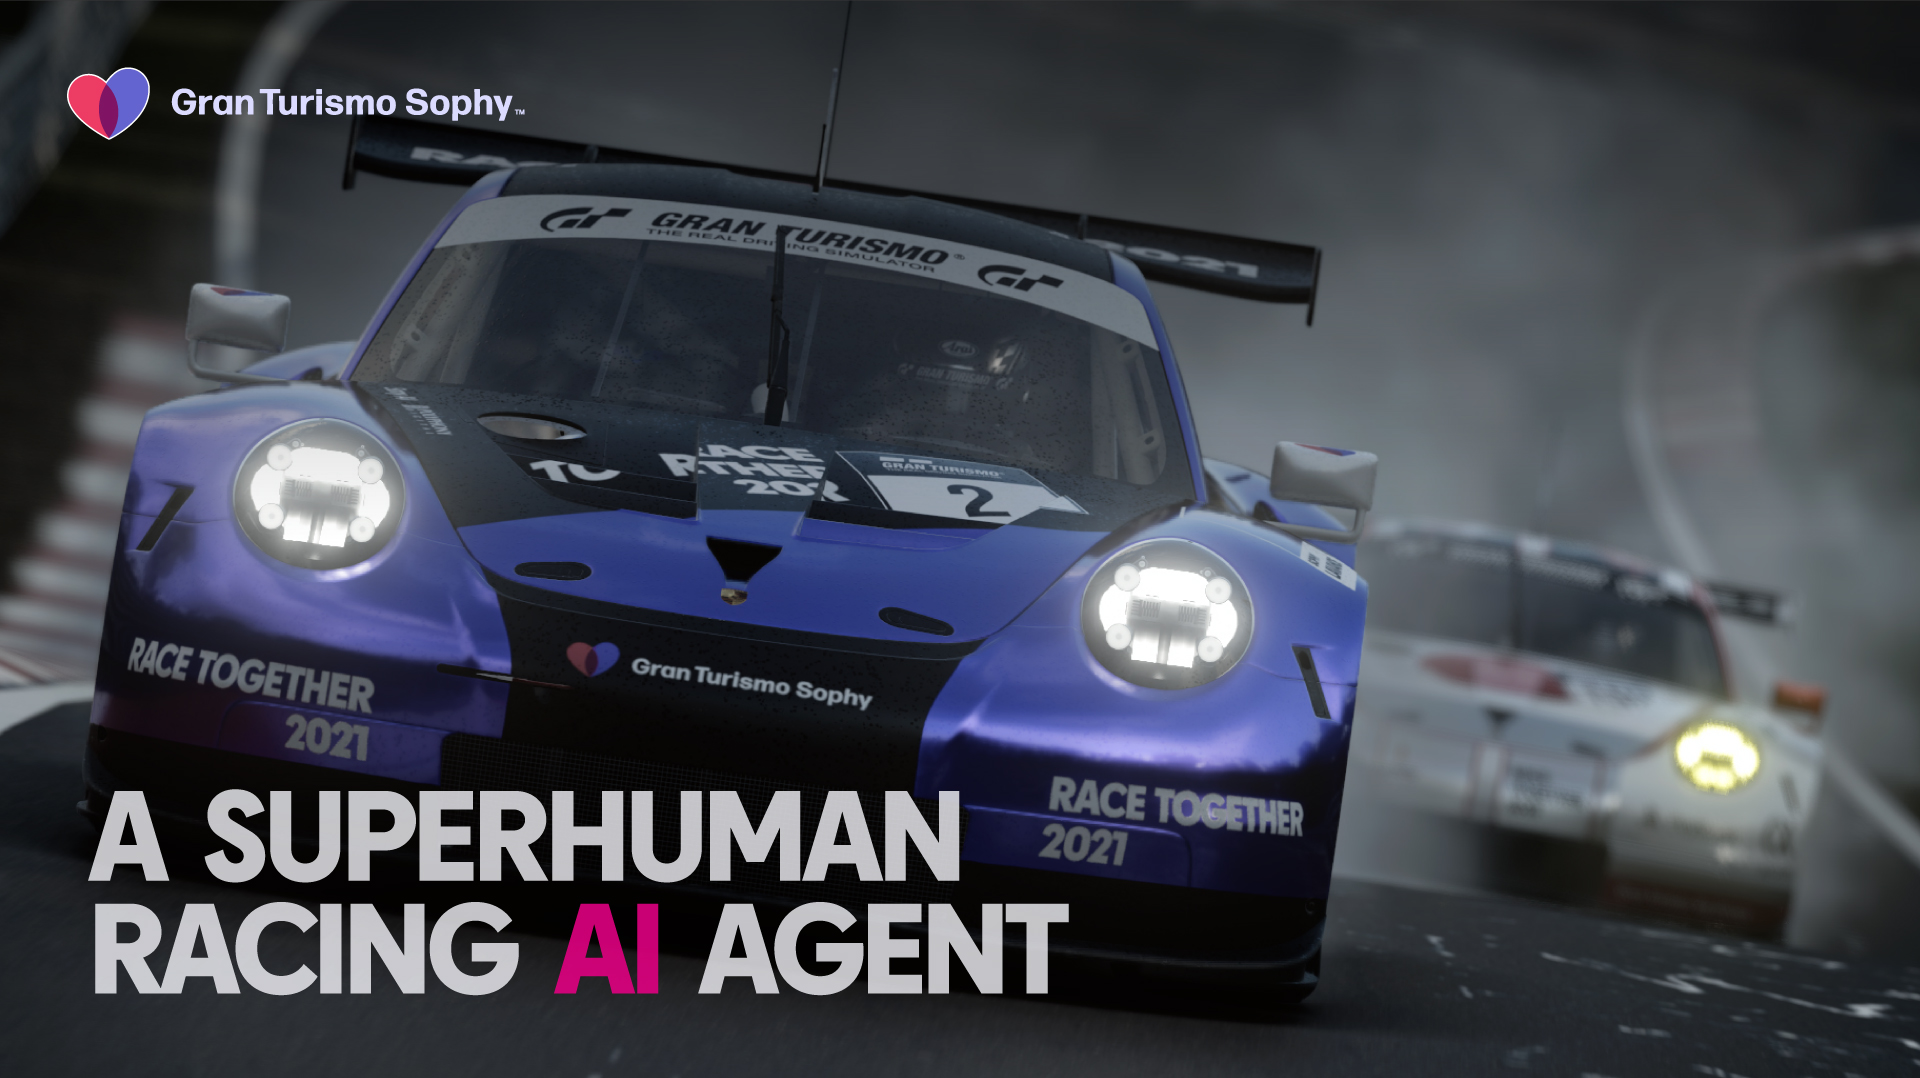 GT Sophy: Sony has trained "superhuman AI" for Gran Turismo